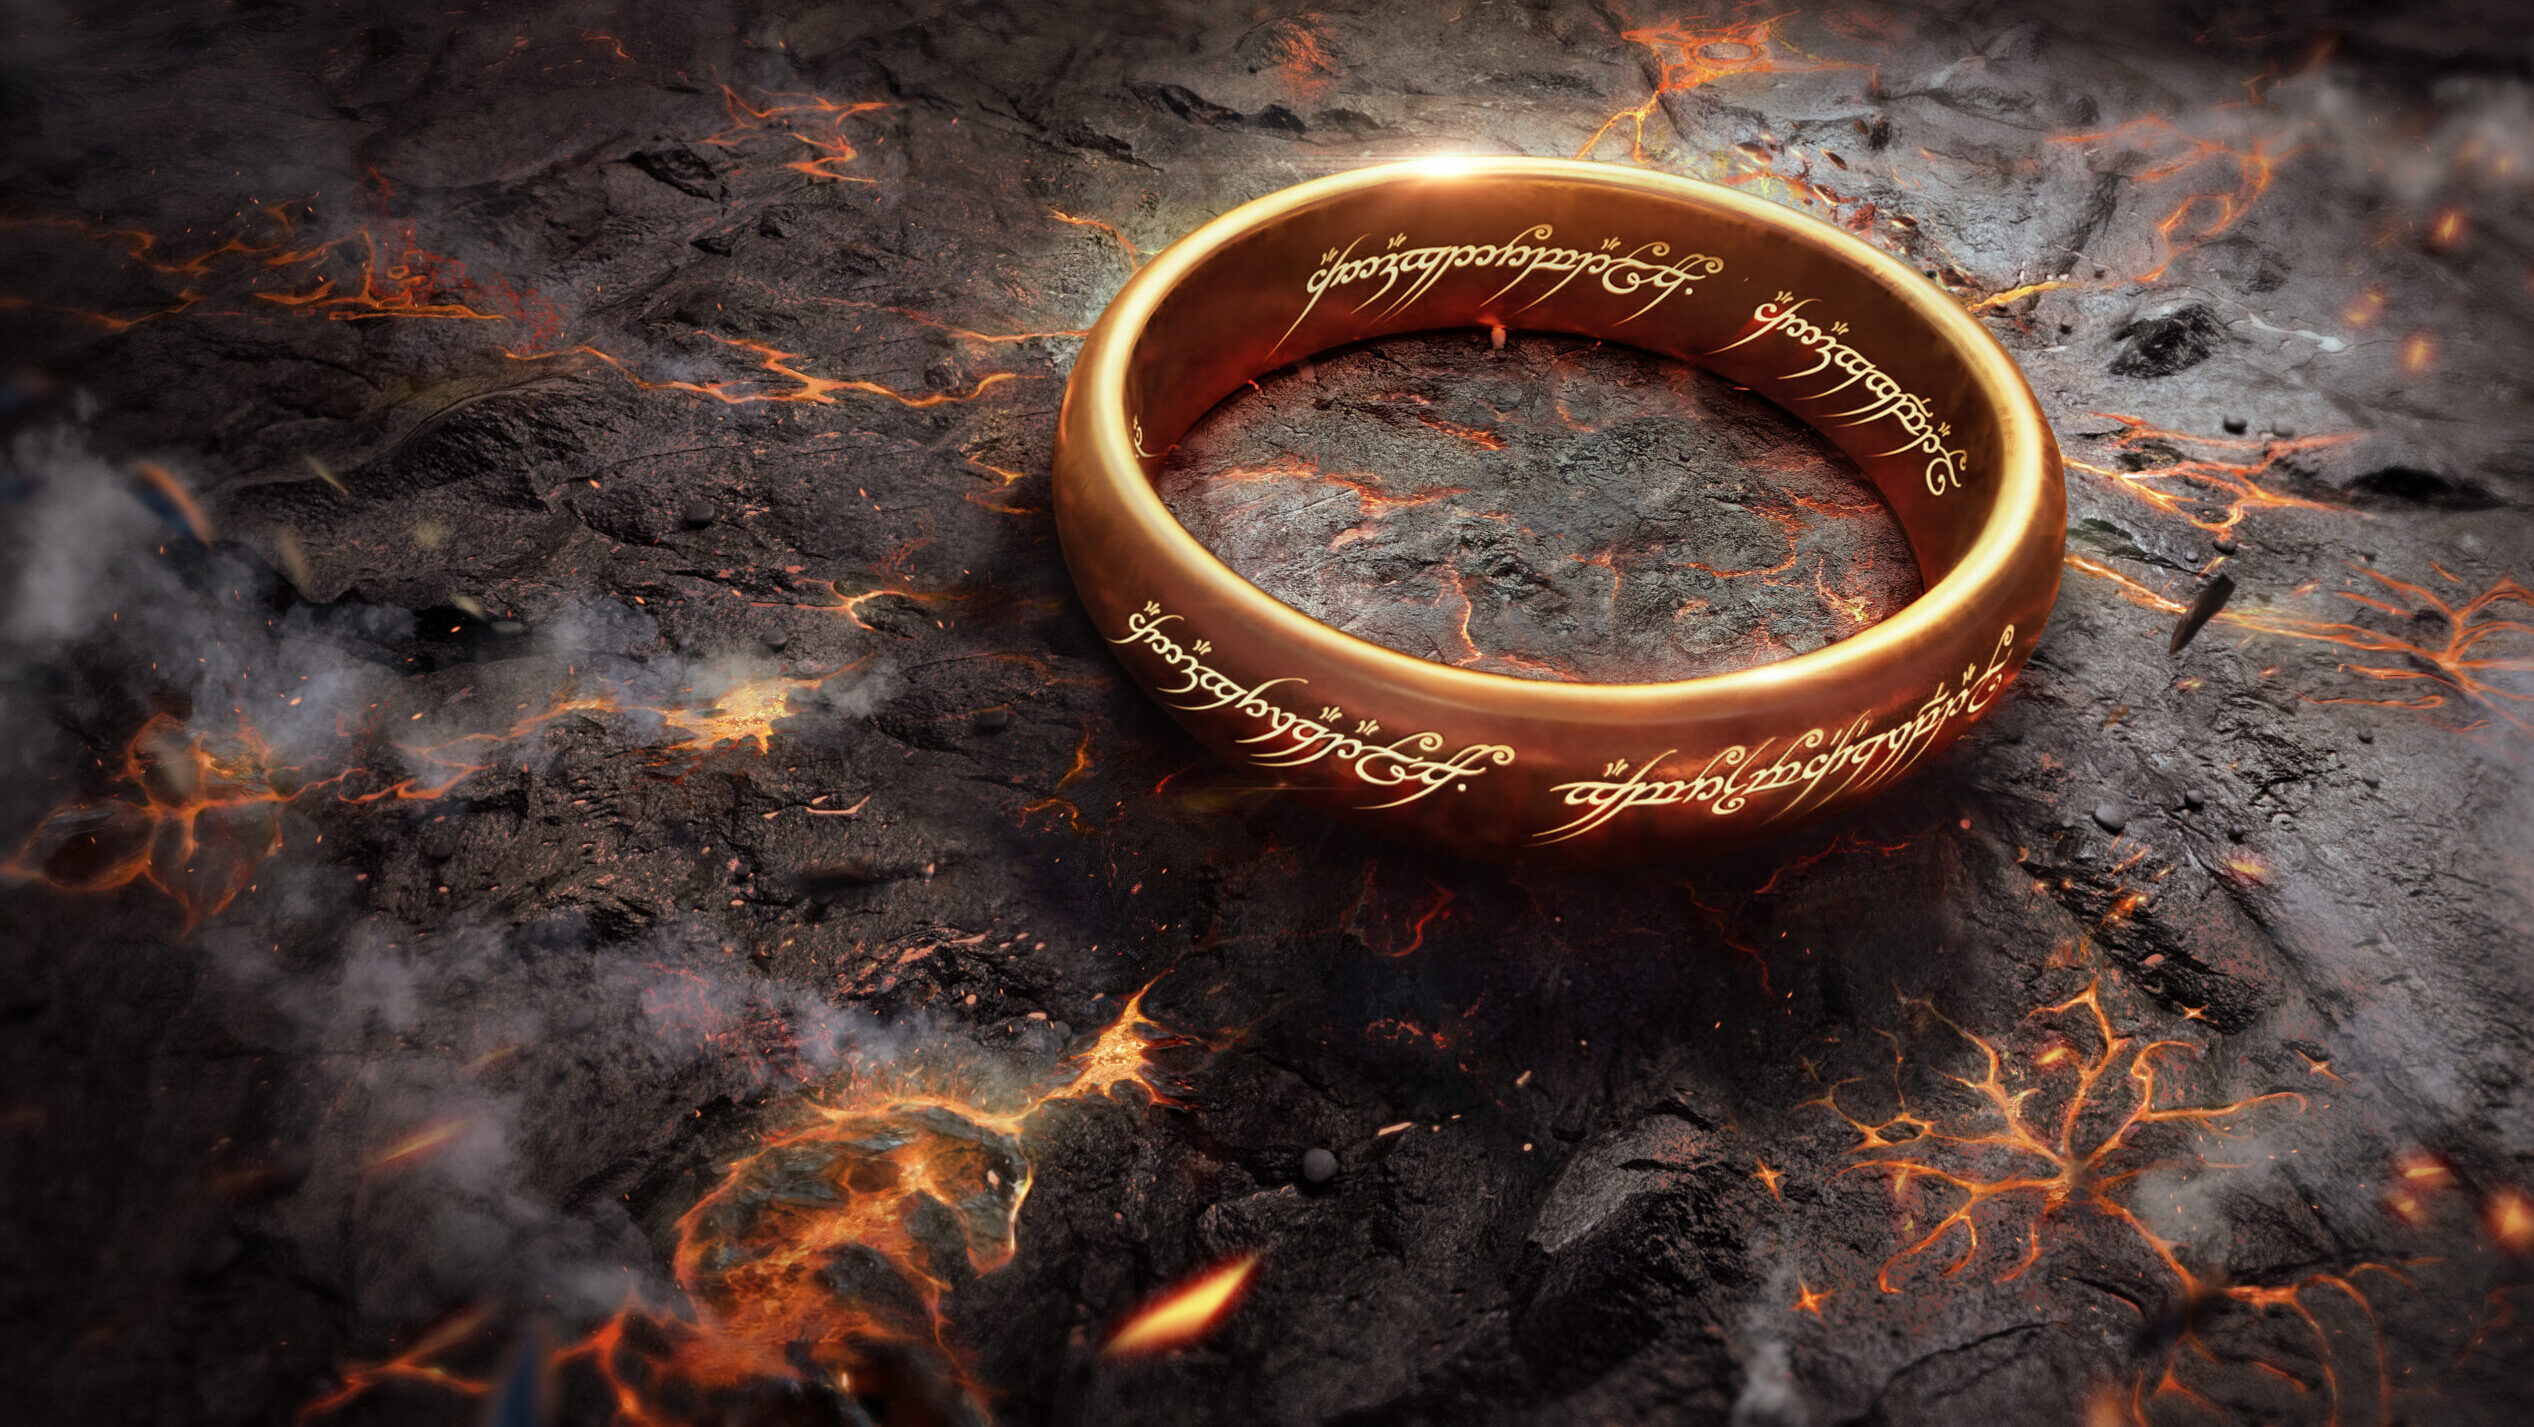 See exclusive The Lord of the Rings: The Rings of Power photos